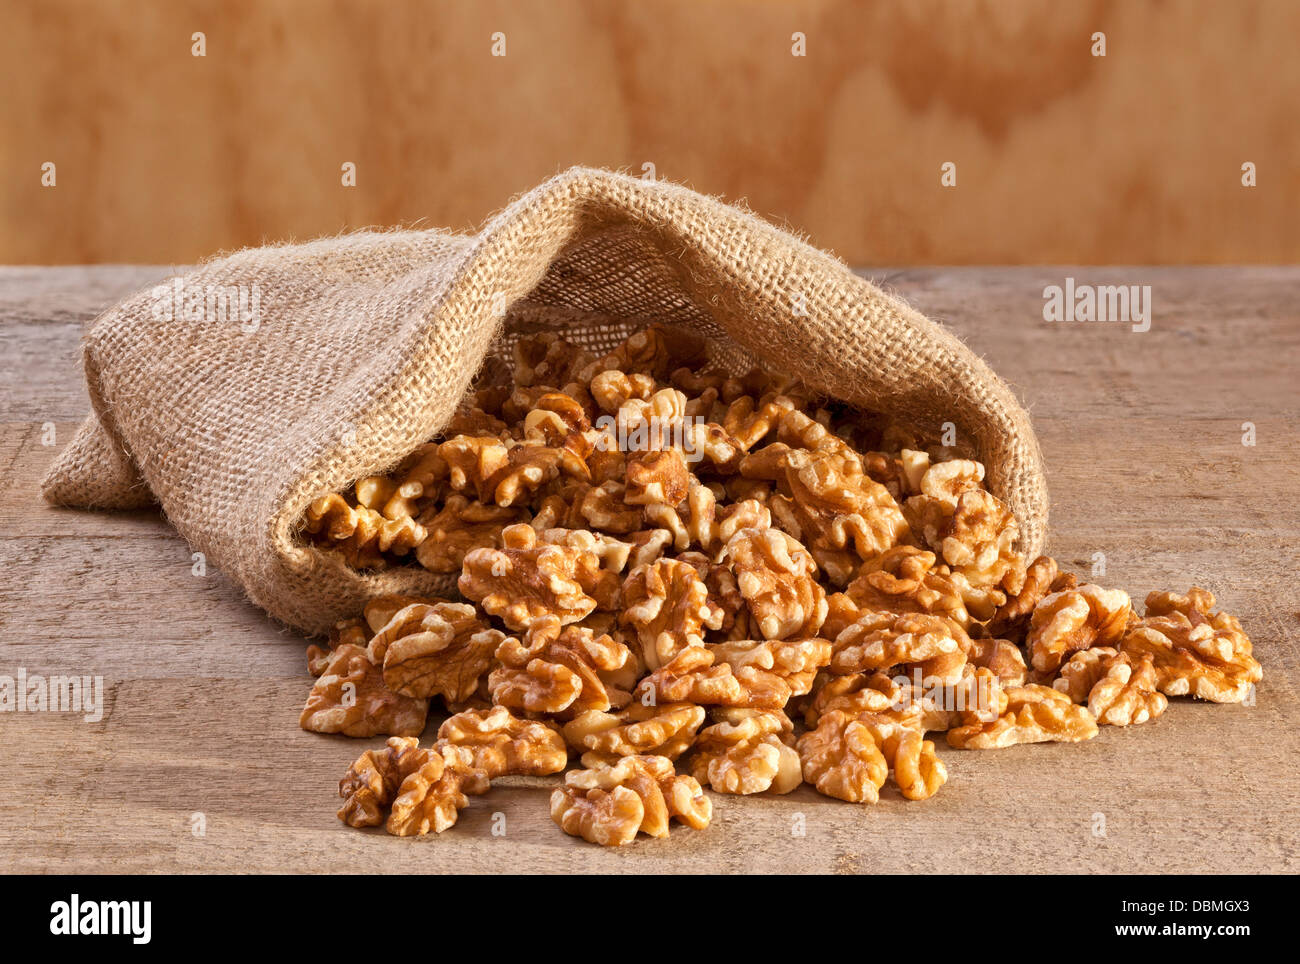 Walnuts in a Sack - shelled walnutrs spilling from a burlap or jute sack, on a rustic plank background. Stock Photo